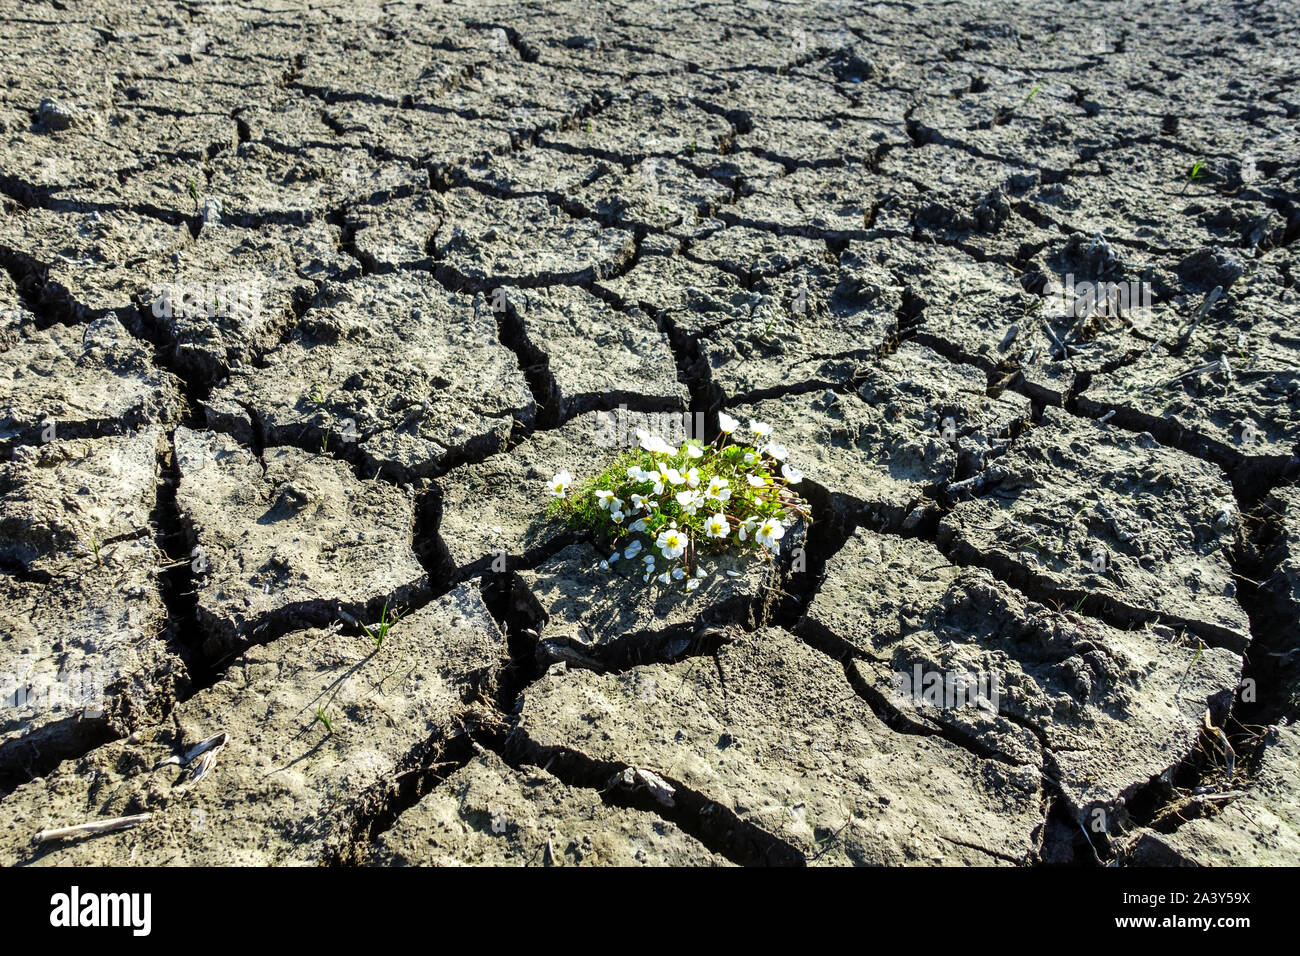 Cracked soil drought, plant Change climate impact Lack of water scene Global warming Stock Photo